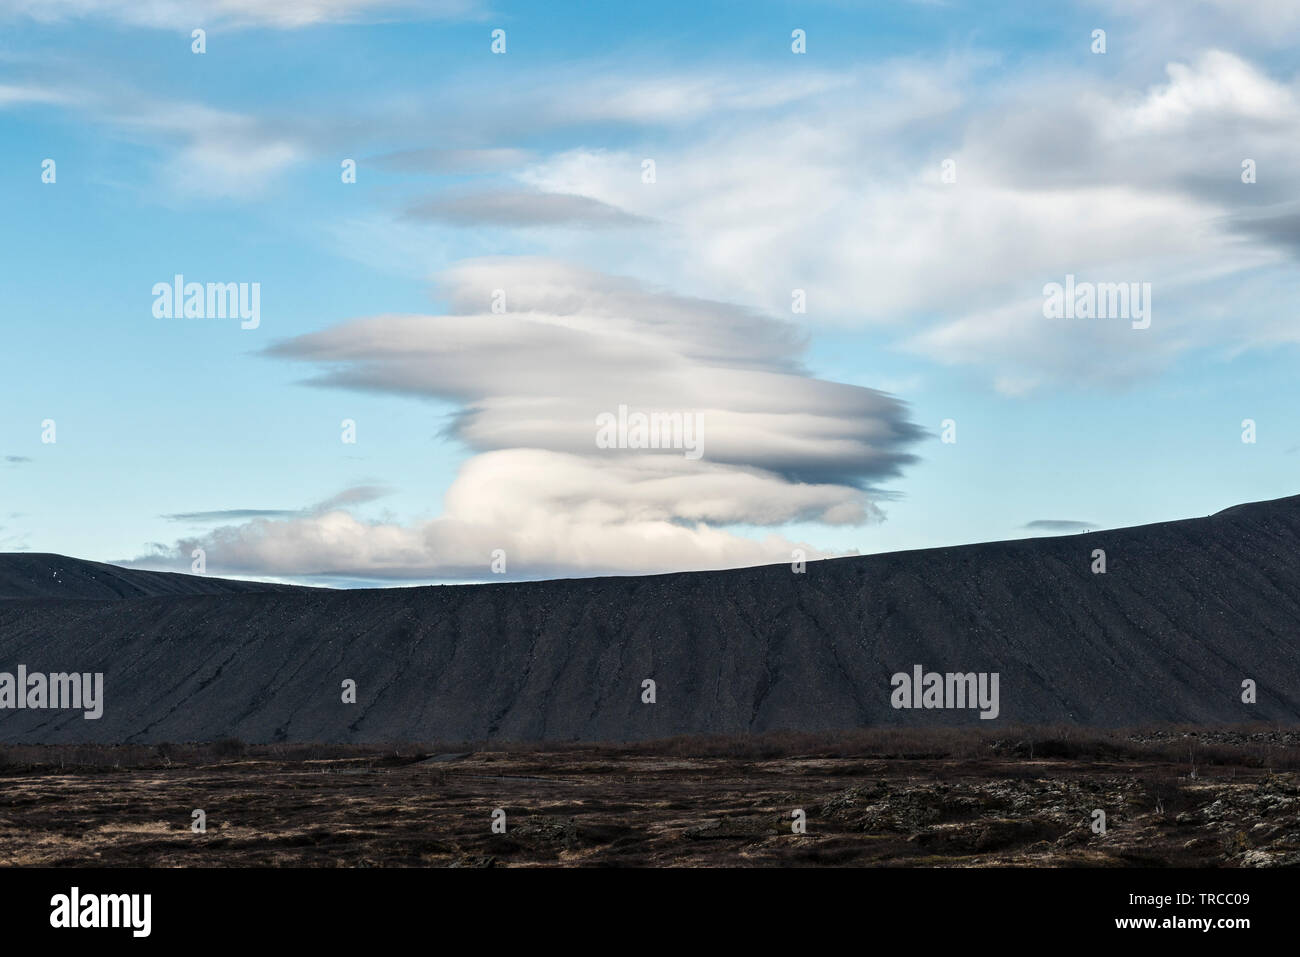 A lenticular cloud over the huge volcanic crater of Hverfjall, Lake Myvatn, Iceland. The tiny figures of two hikers can be seen (rt) on the crater rim Stock Photo